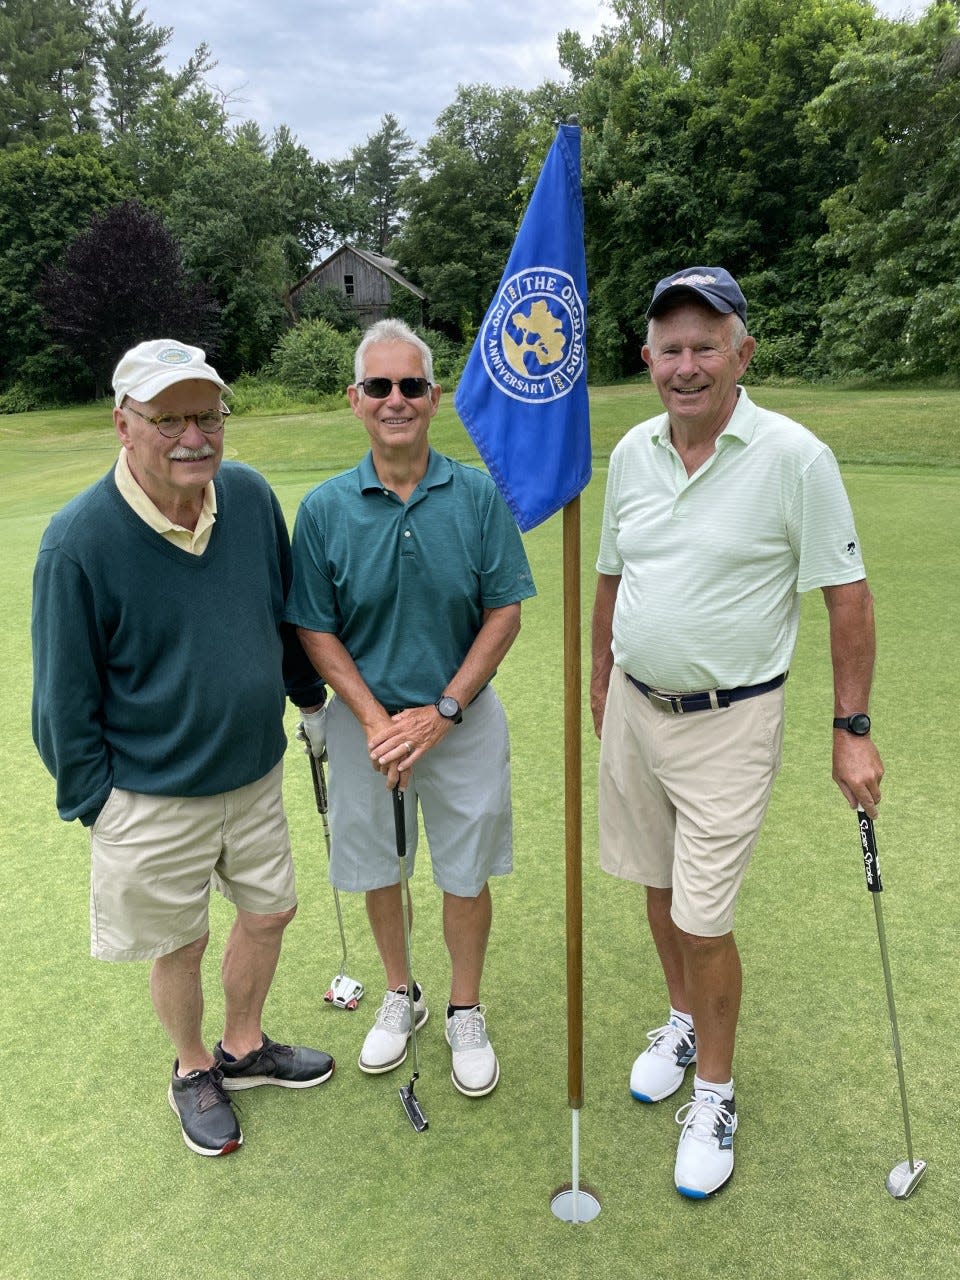 From left, Dr. Bill DuPont, Mark Hobby and Tom Wylie on a green at The Orchards Golf Club.